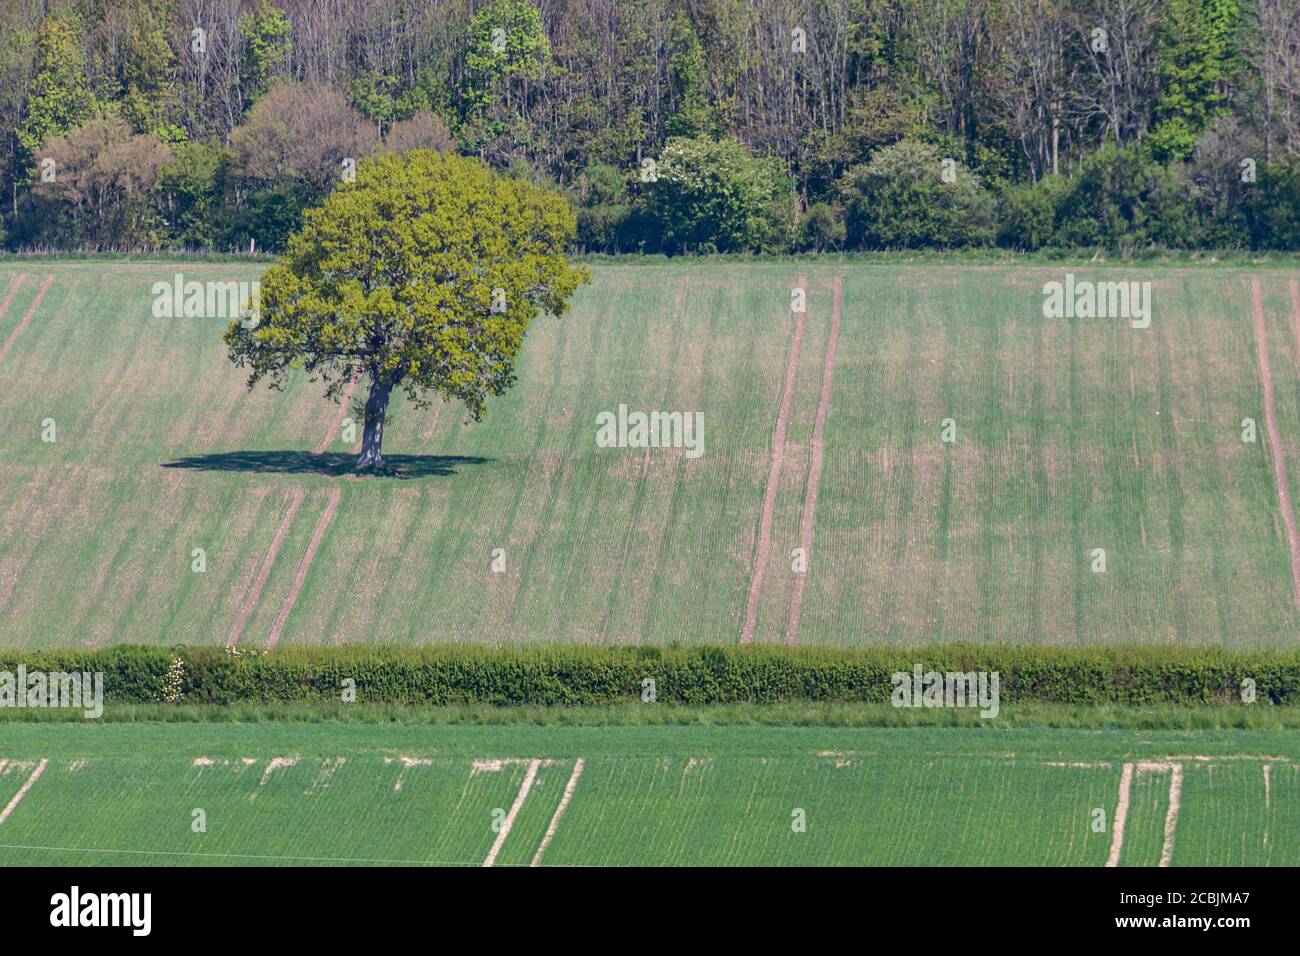 A high angle view of a tree in a field Stock Photo